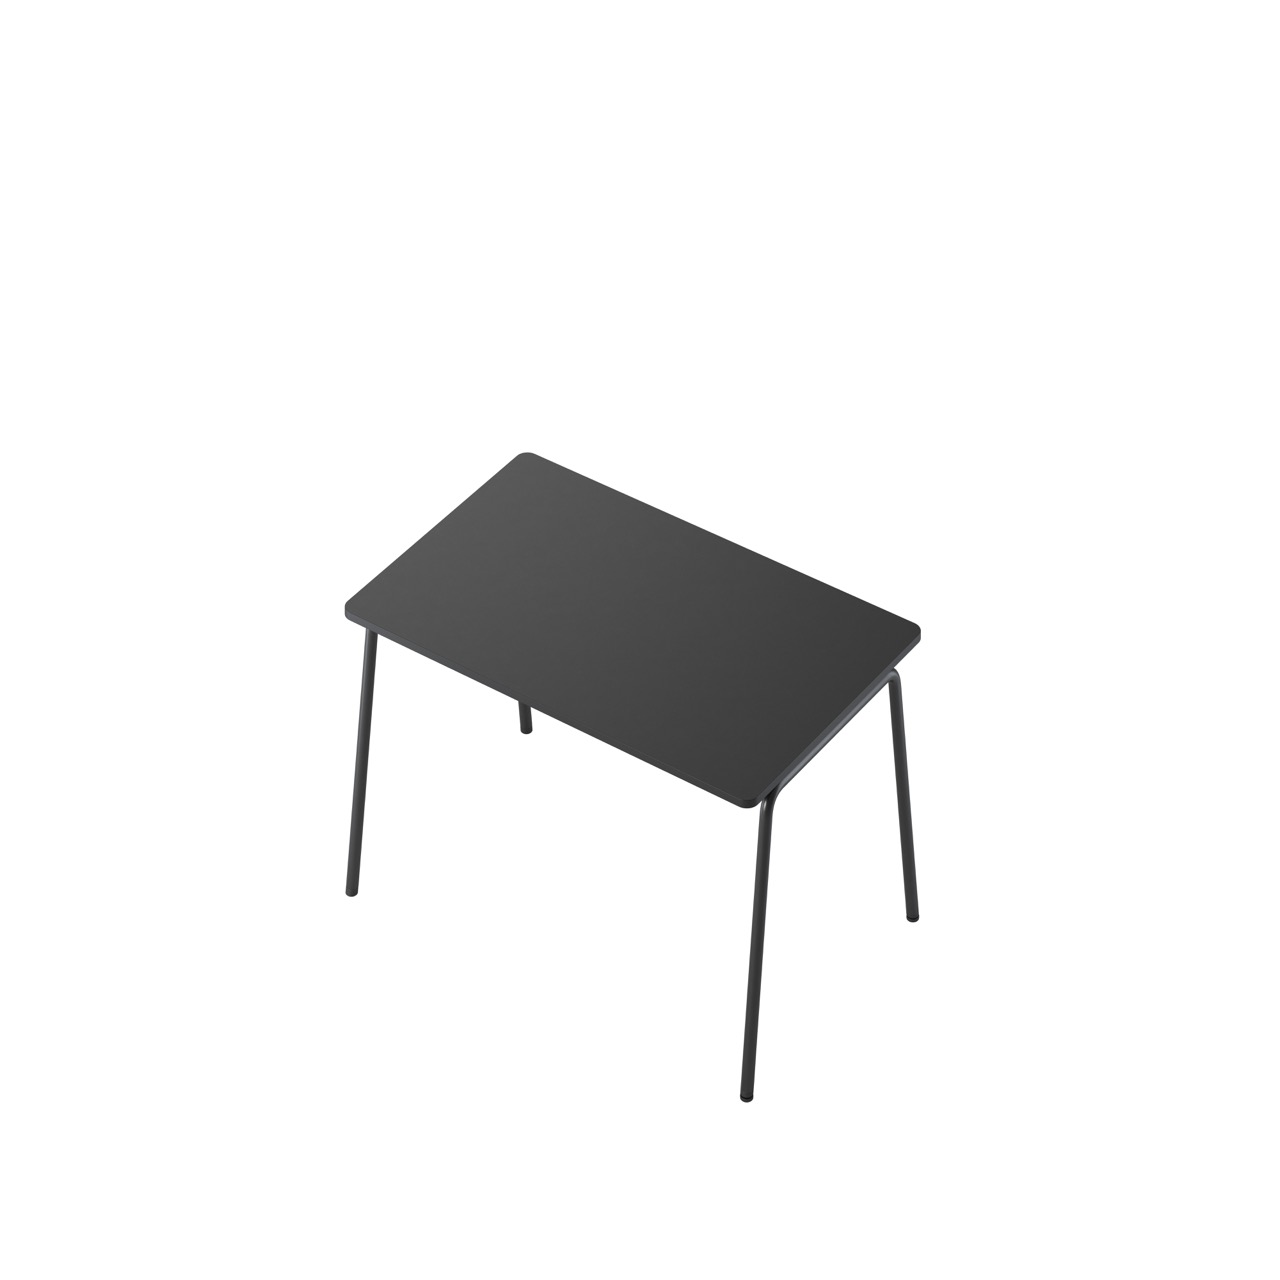 OCEE&FOUR - Tables - FourReal 74 - 120 x 80 - Angled - Packshot Image 3 Large